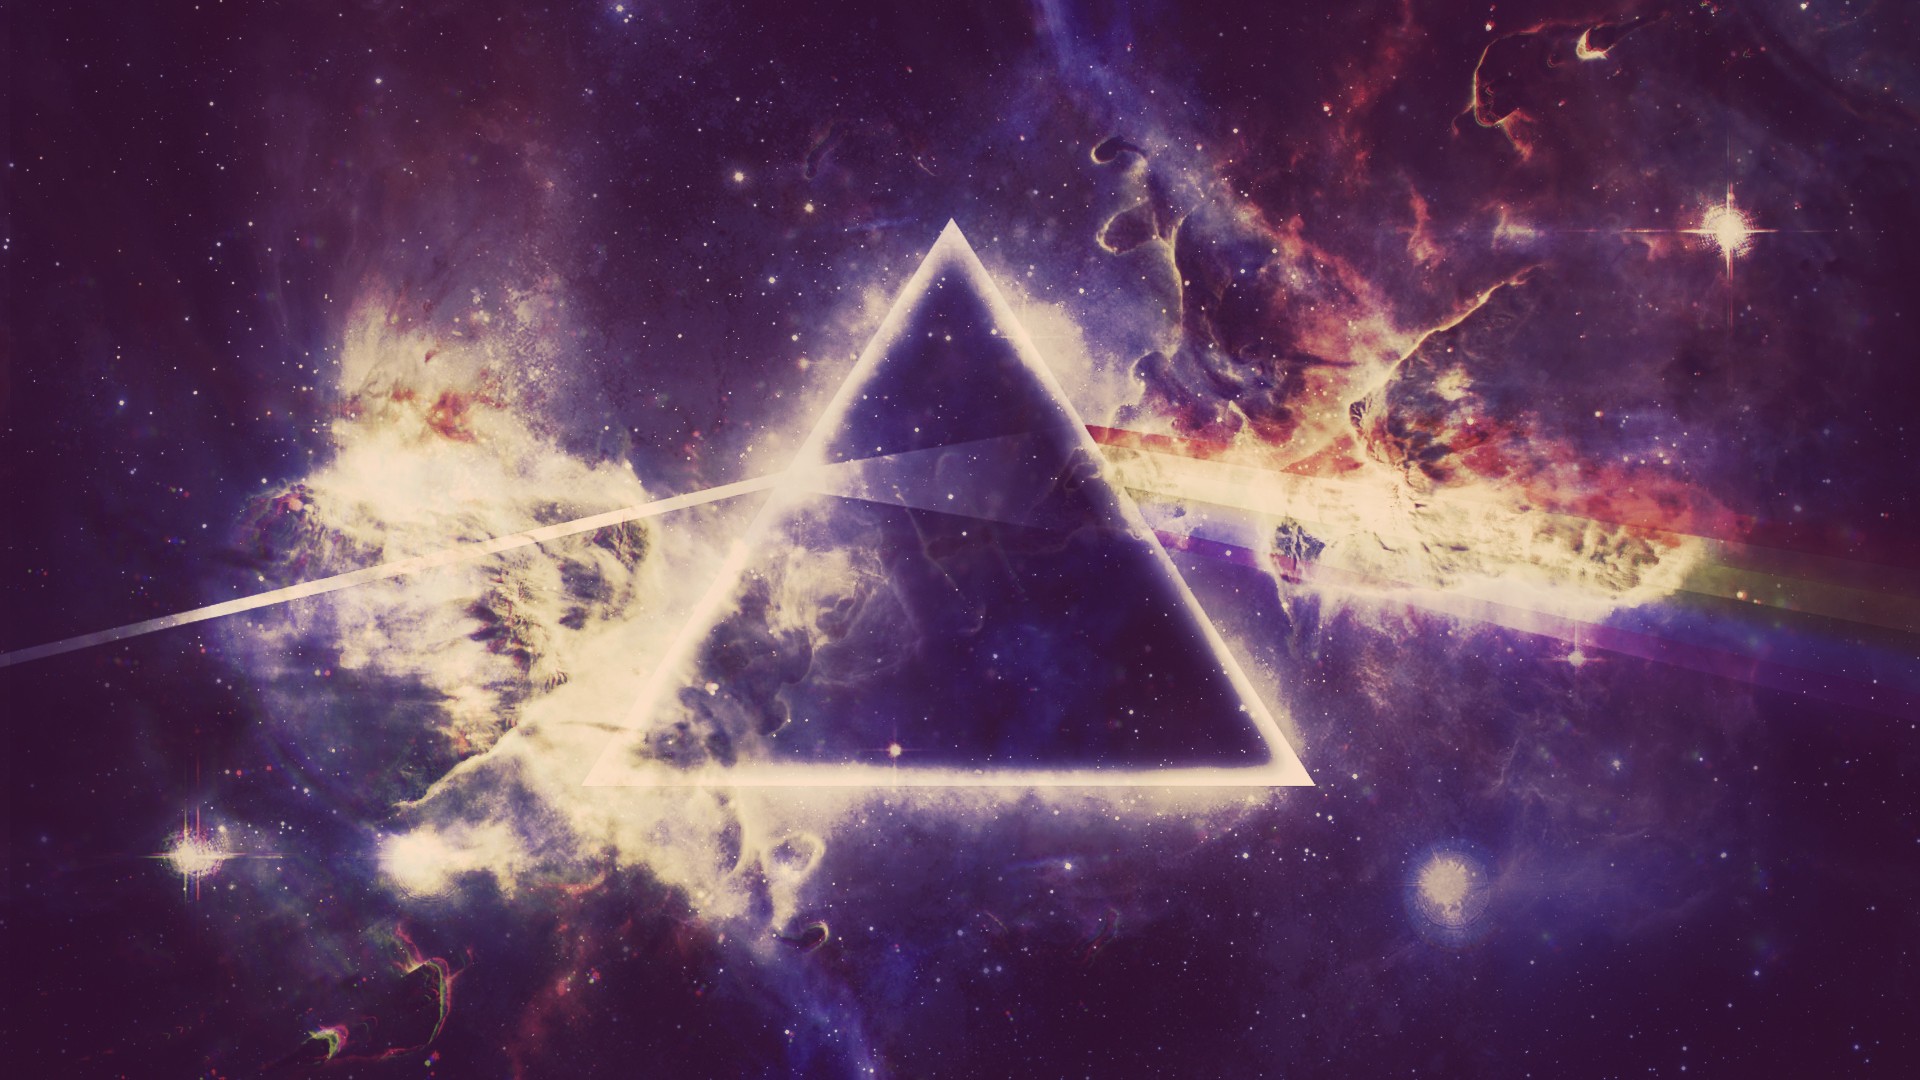 Galaxy Tumblr Triangle Wallpapers